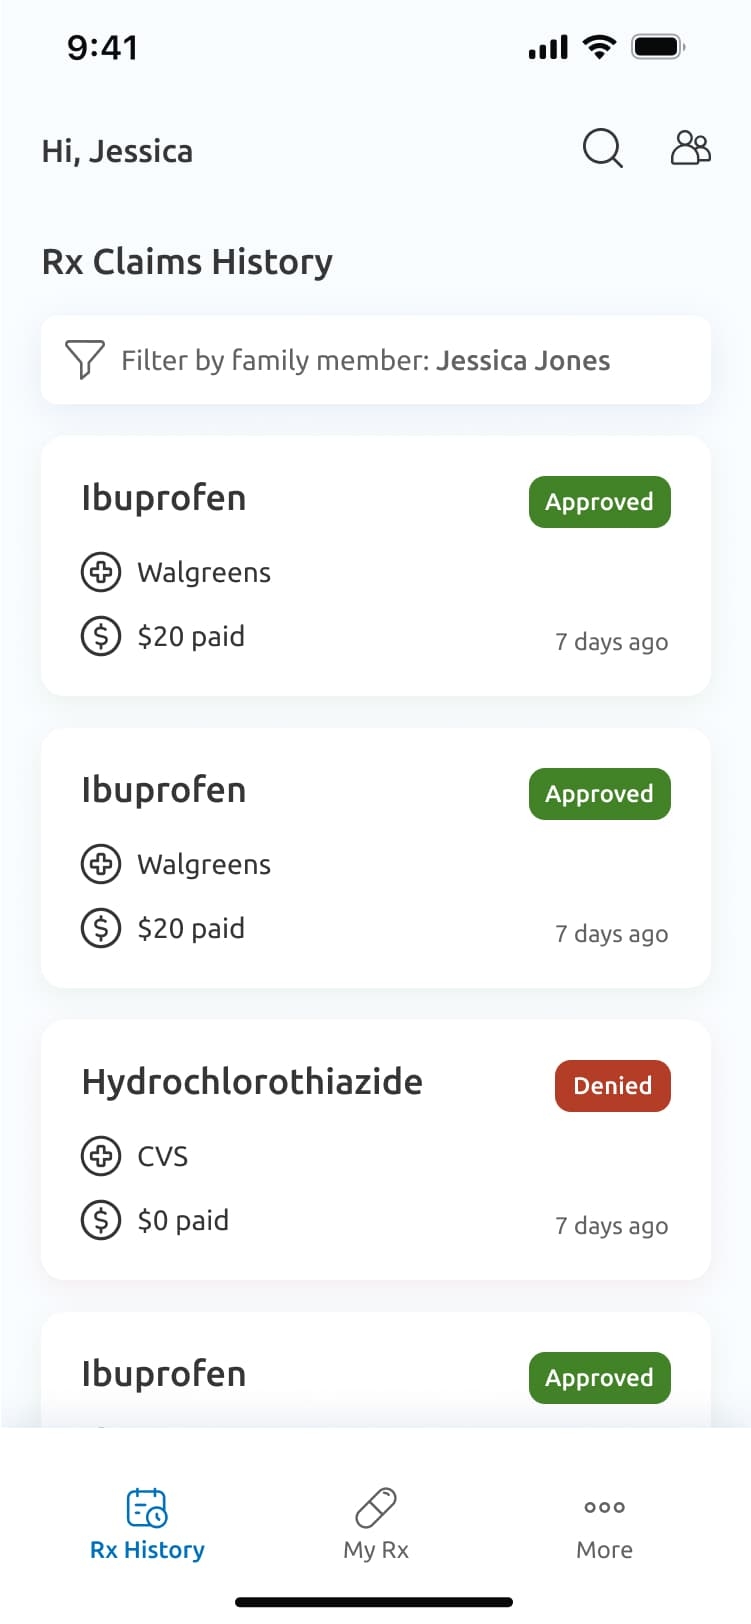 A Magellan app screen displaying Rx Claims History for Jessica. Ibuprofen claims are approved, while a hydrochlorothiazide claim is denied.